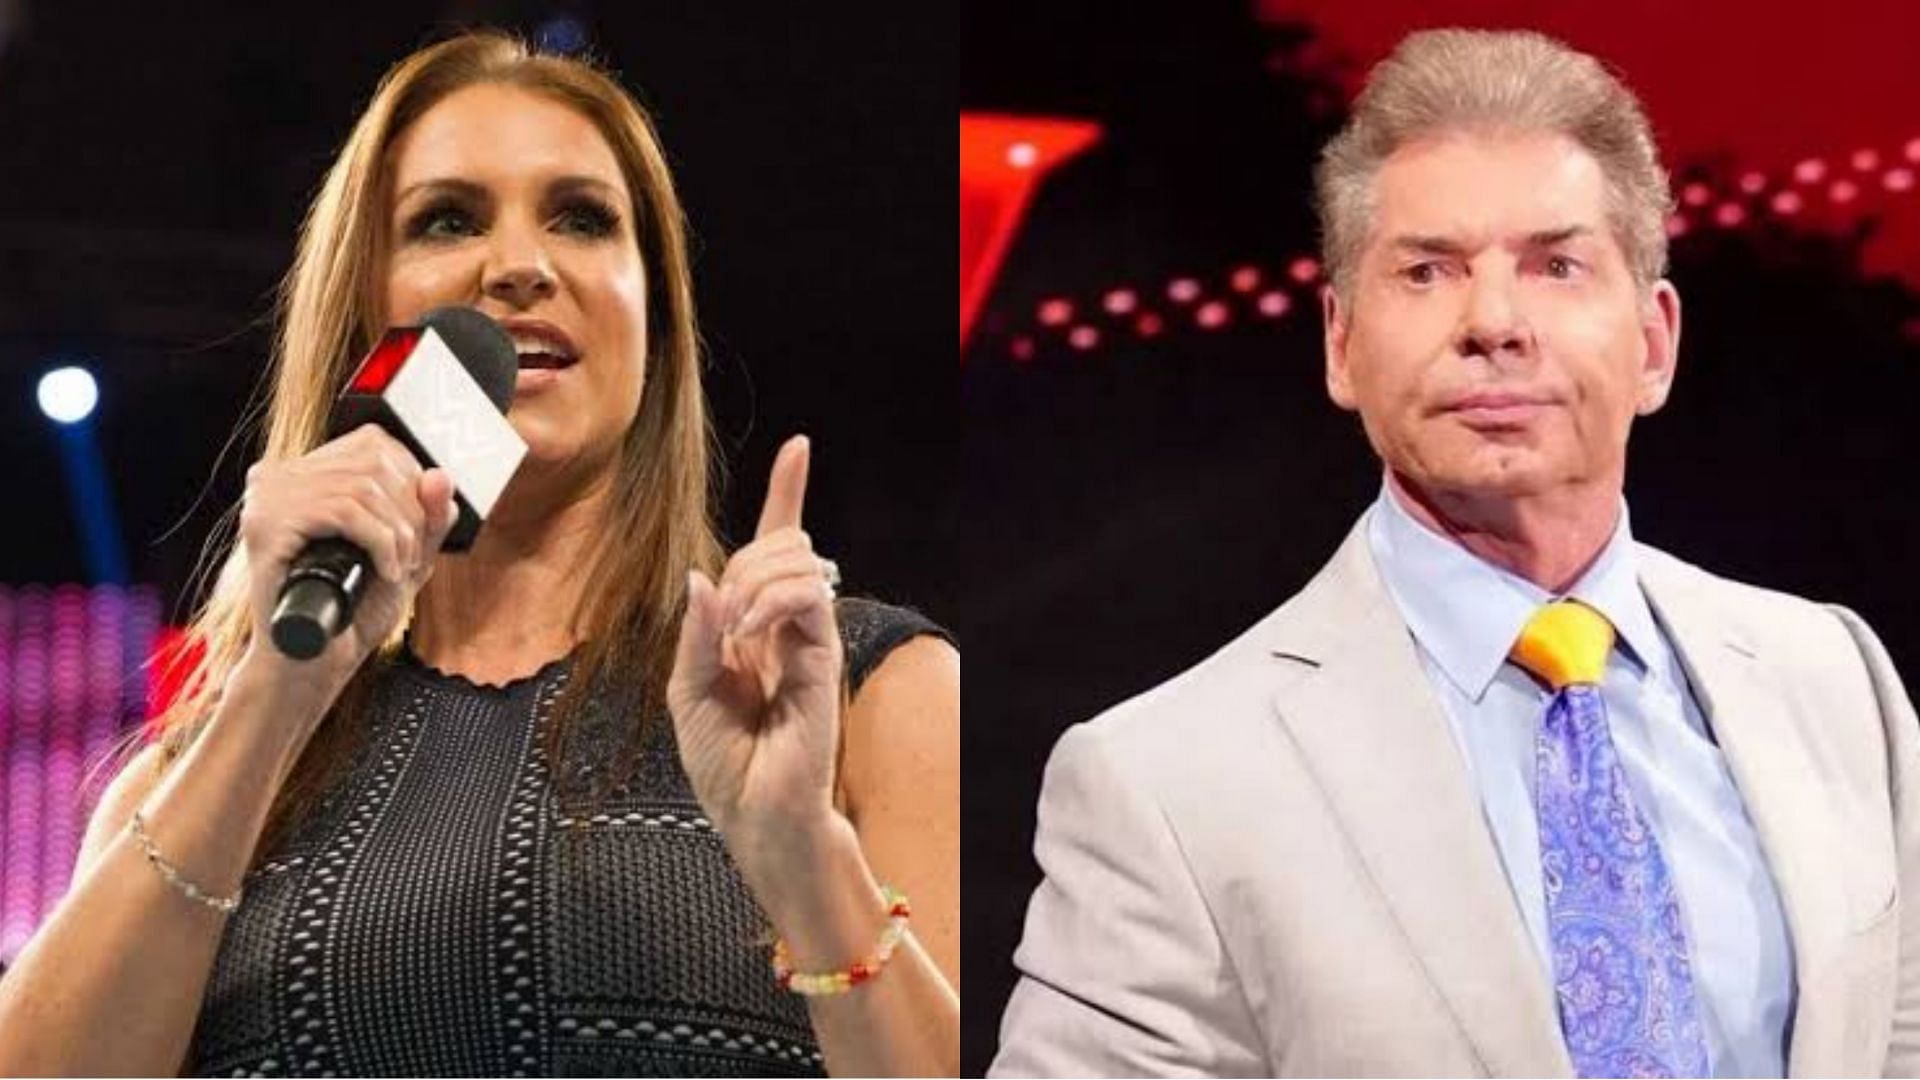 Stephanie McMahon is the interim CEO and Chairwoman of WWE!